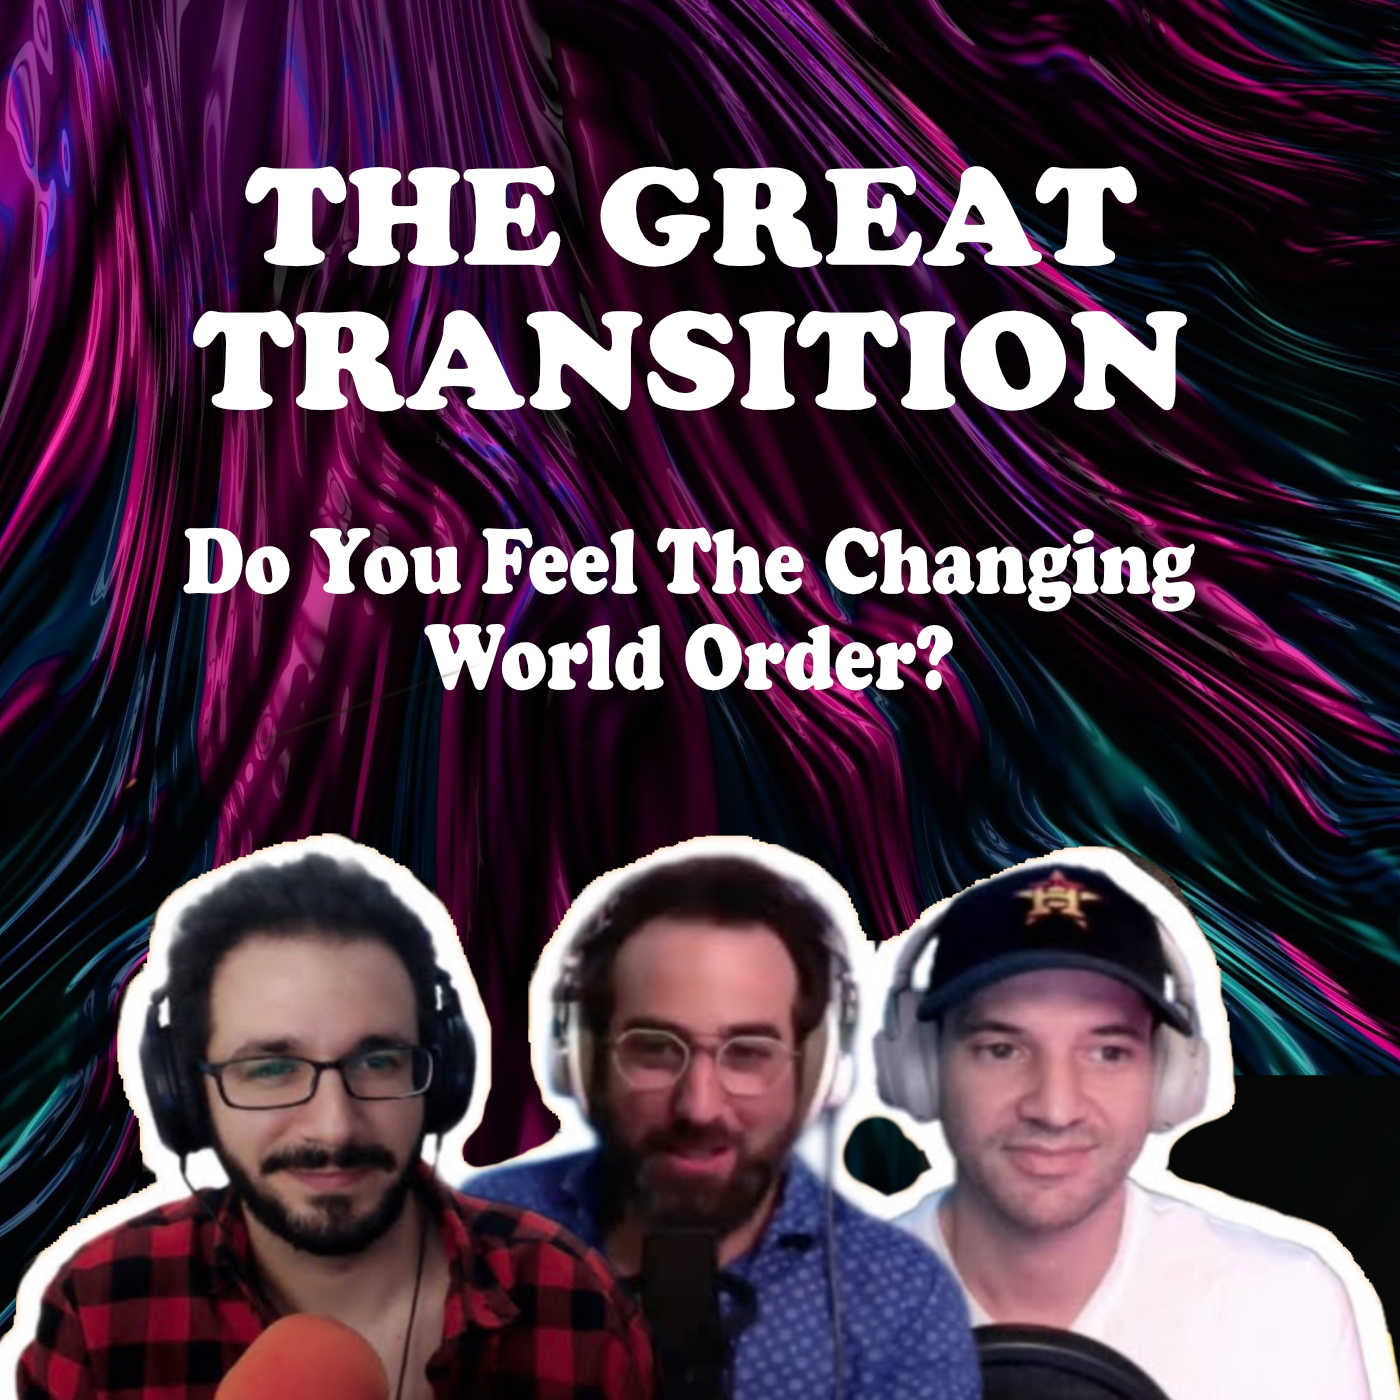 The Great Transition - Do You Feel The Changing World Order?